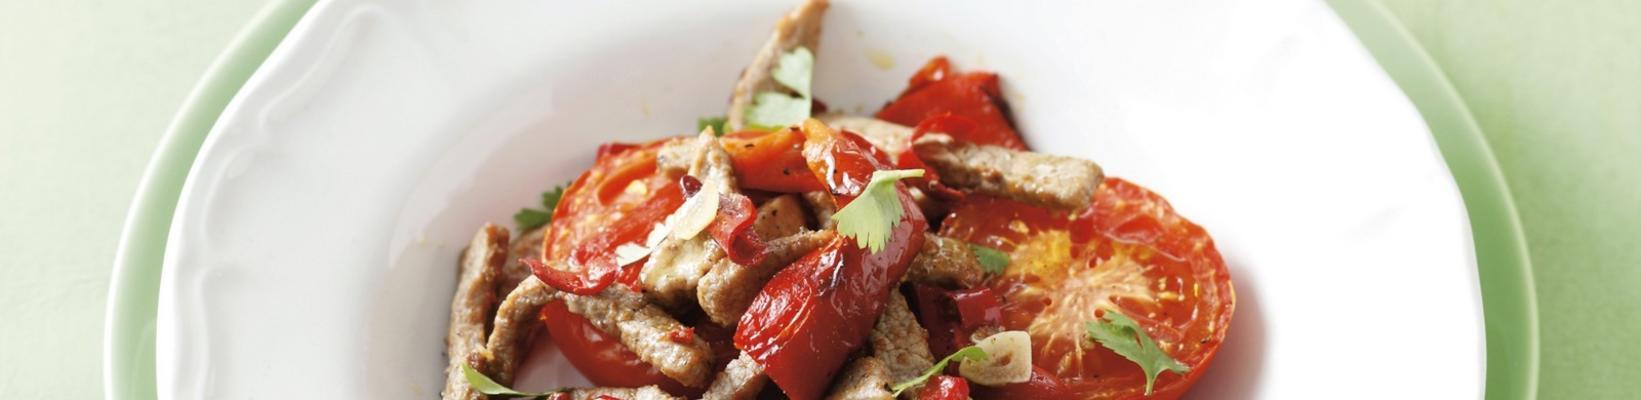 red lukewarm salad with spicy meat